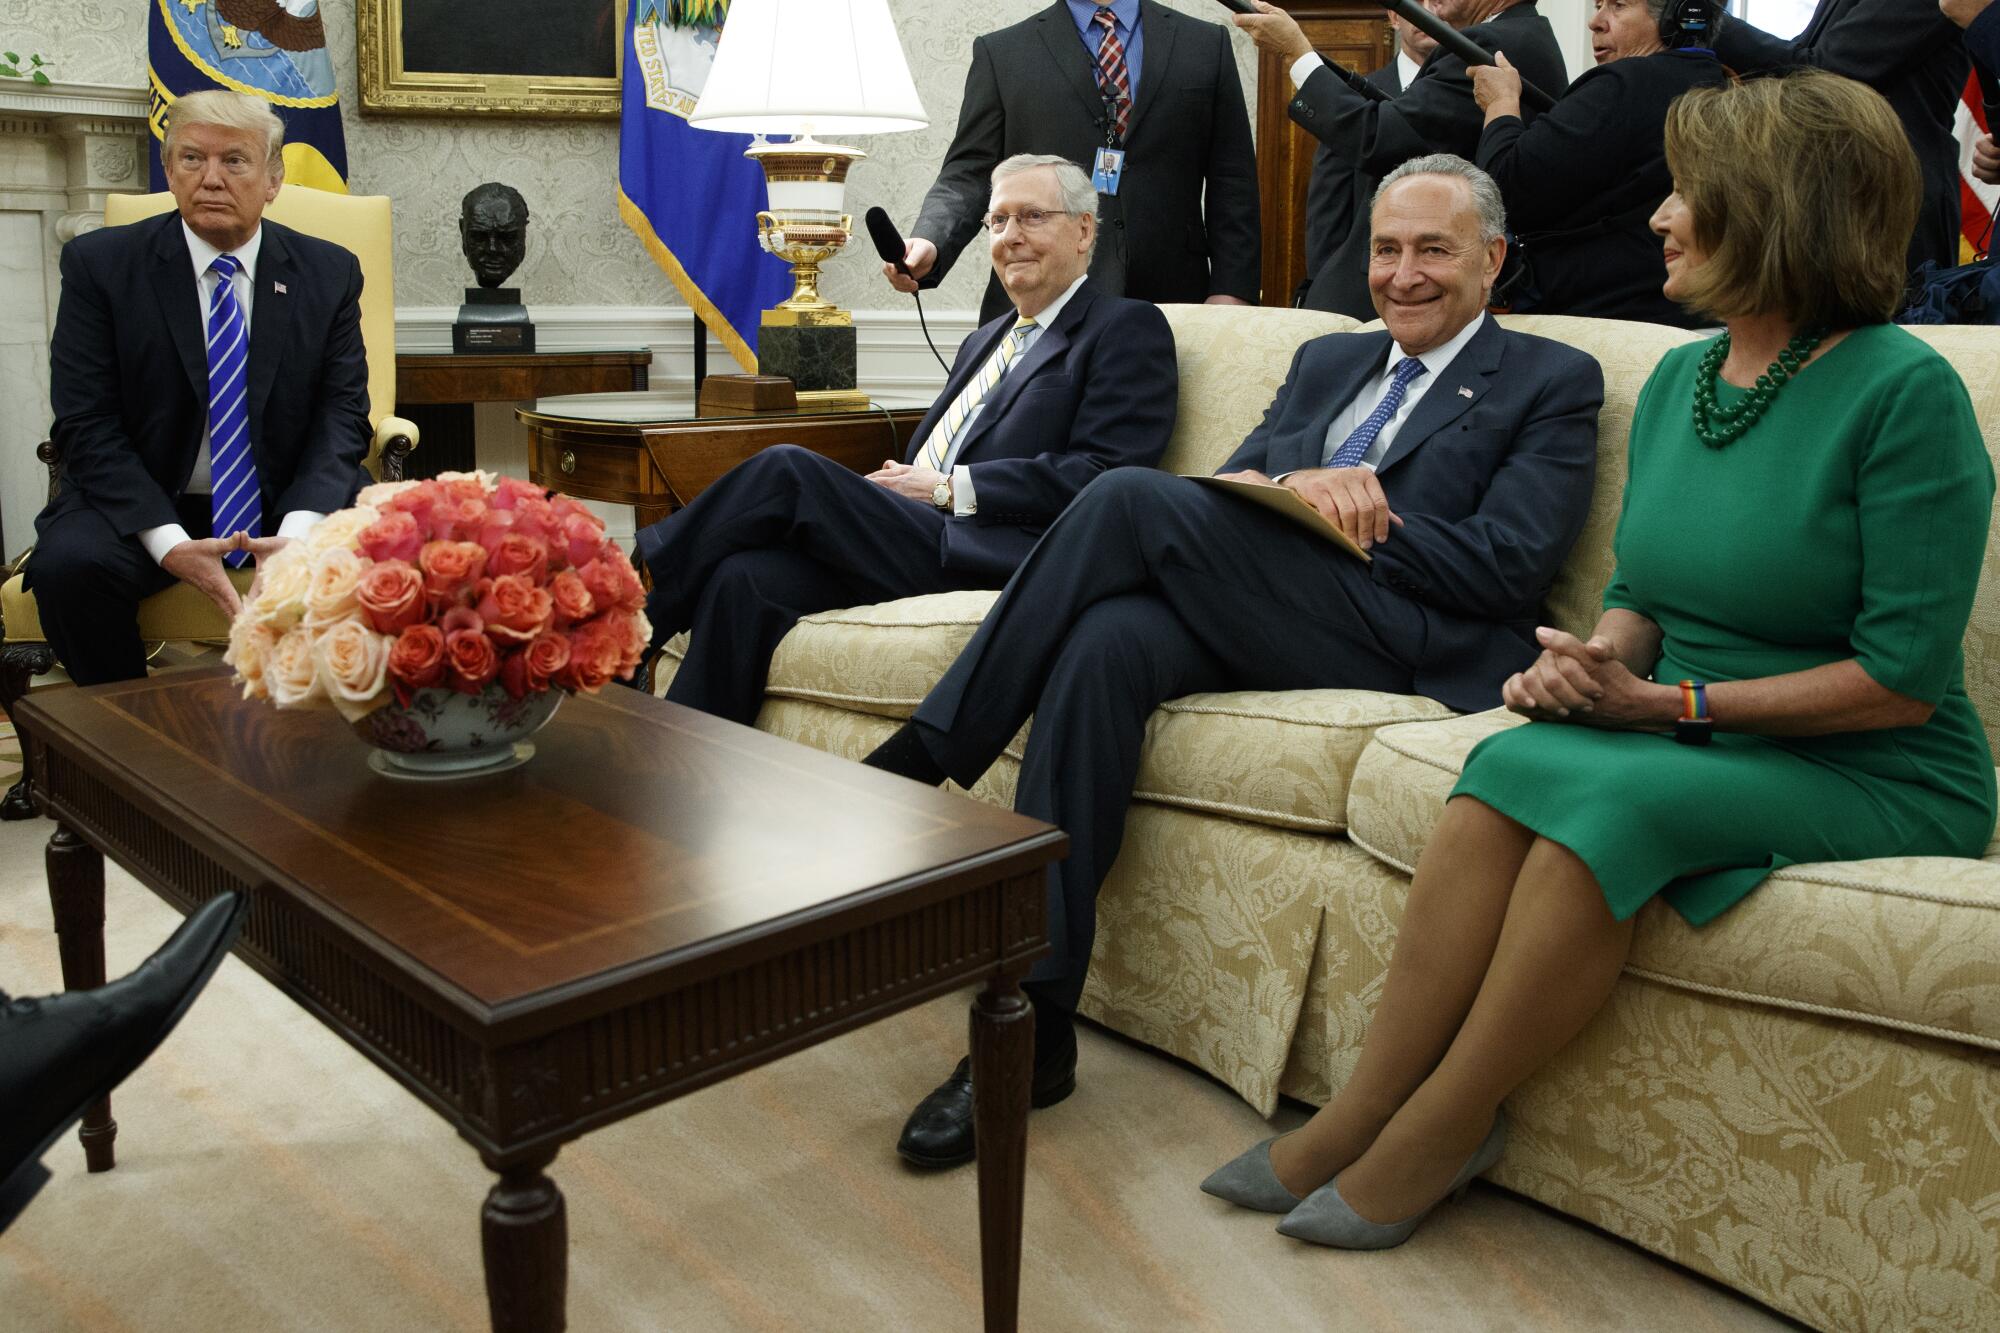 President Trump meets with Mitch McConnell, Charles Schumer and Nancy Pelosi in the Oval Office on Sept. 6, 2017.